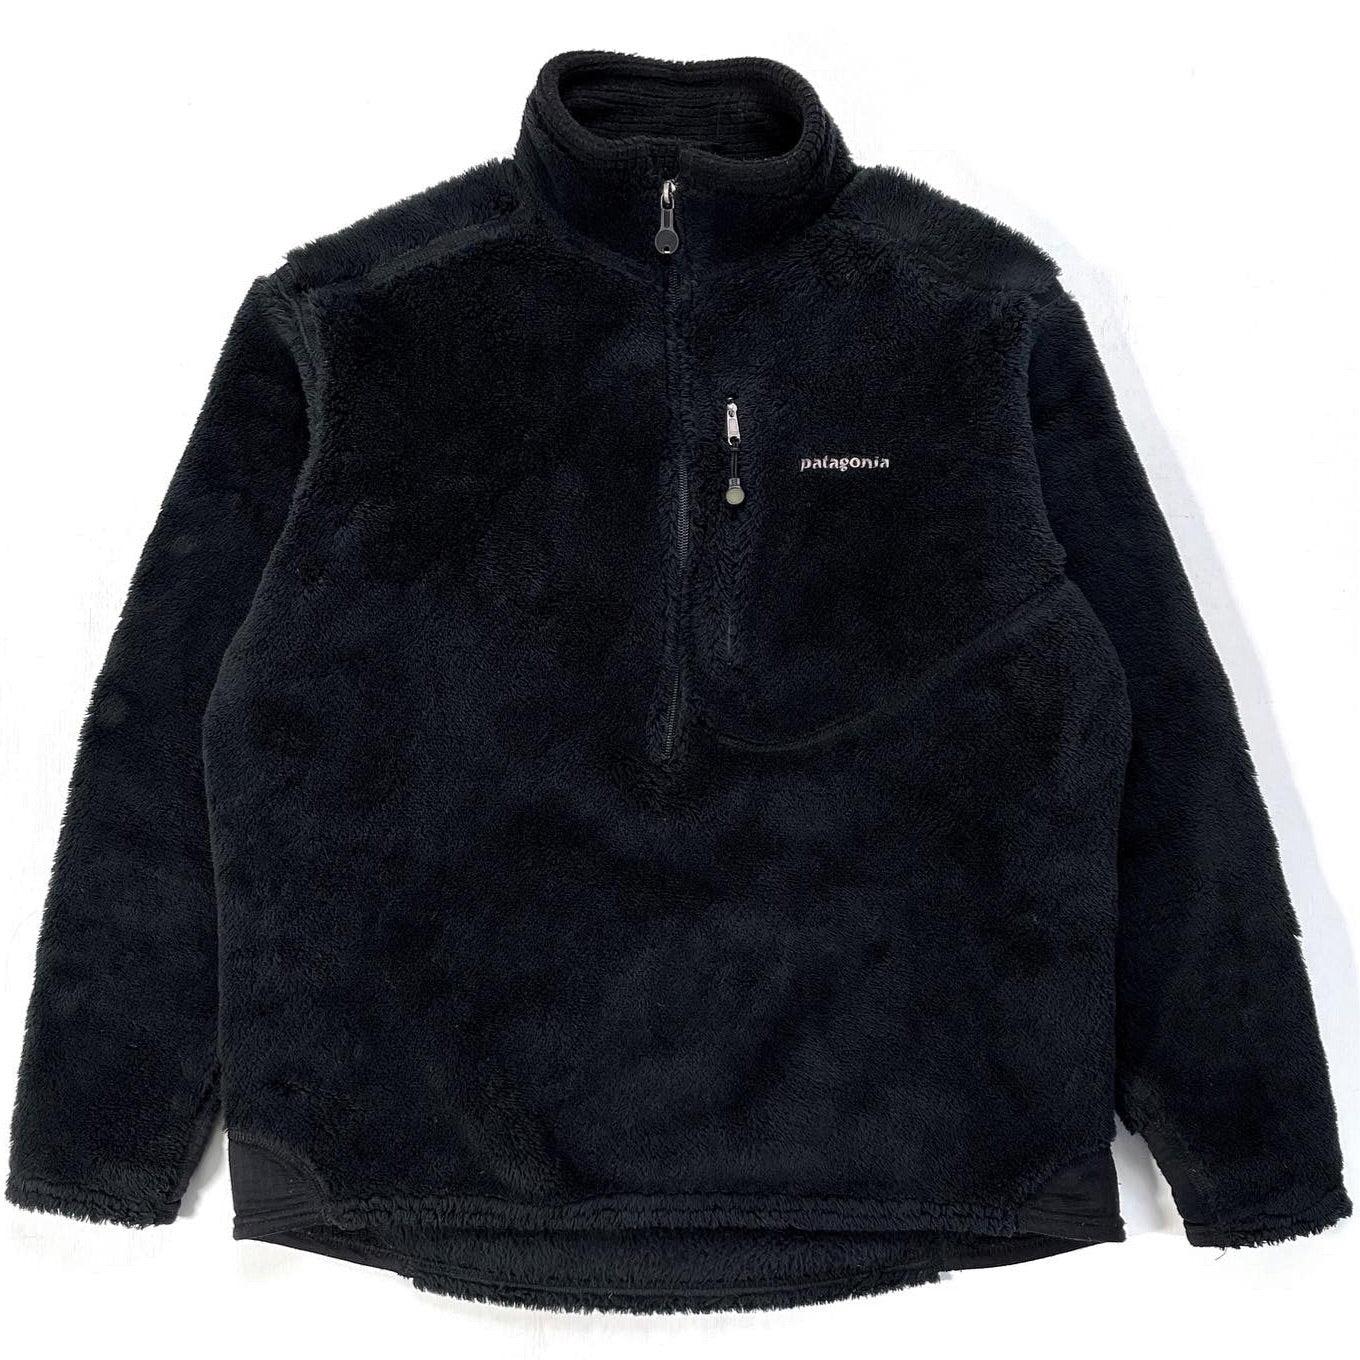 2004 Patagonia Made In The U.S.A. R2 Body Rug Pullover, Black (L)